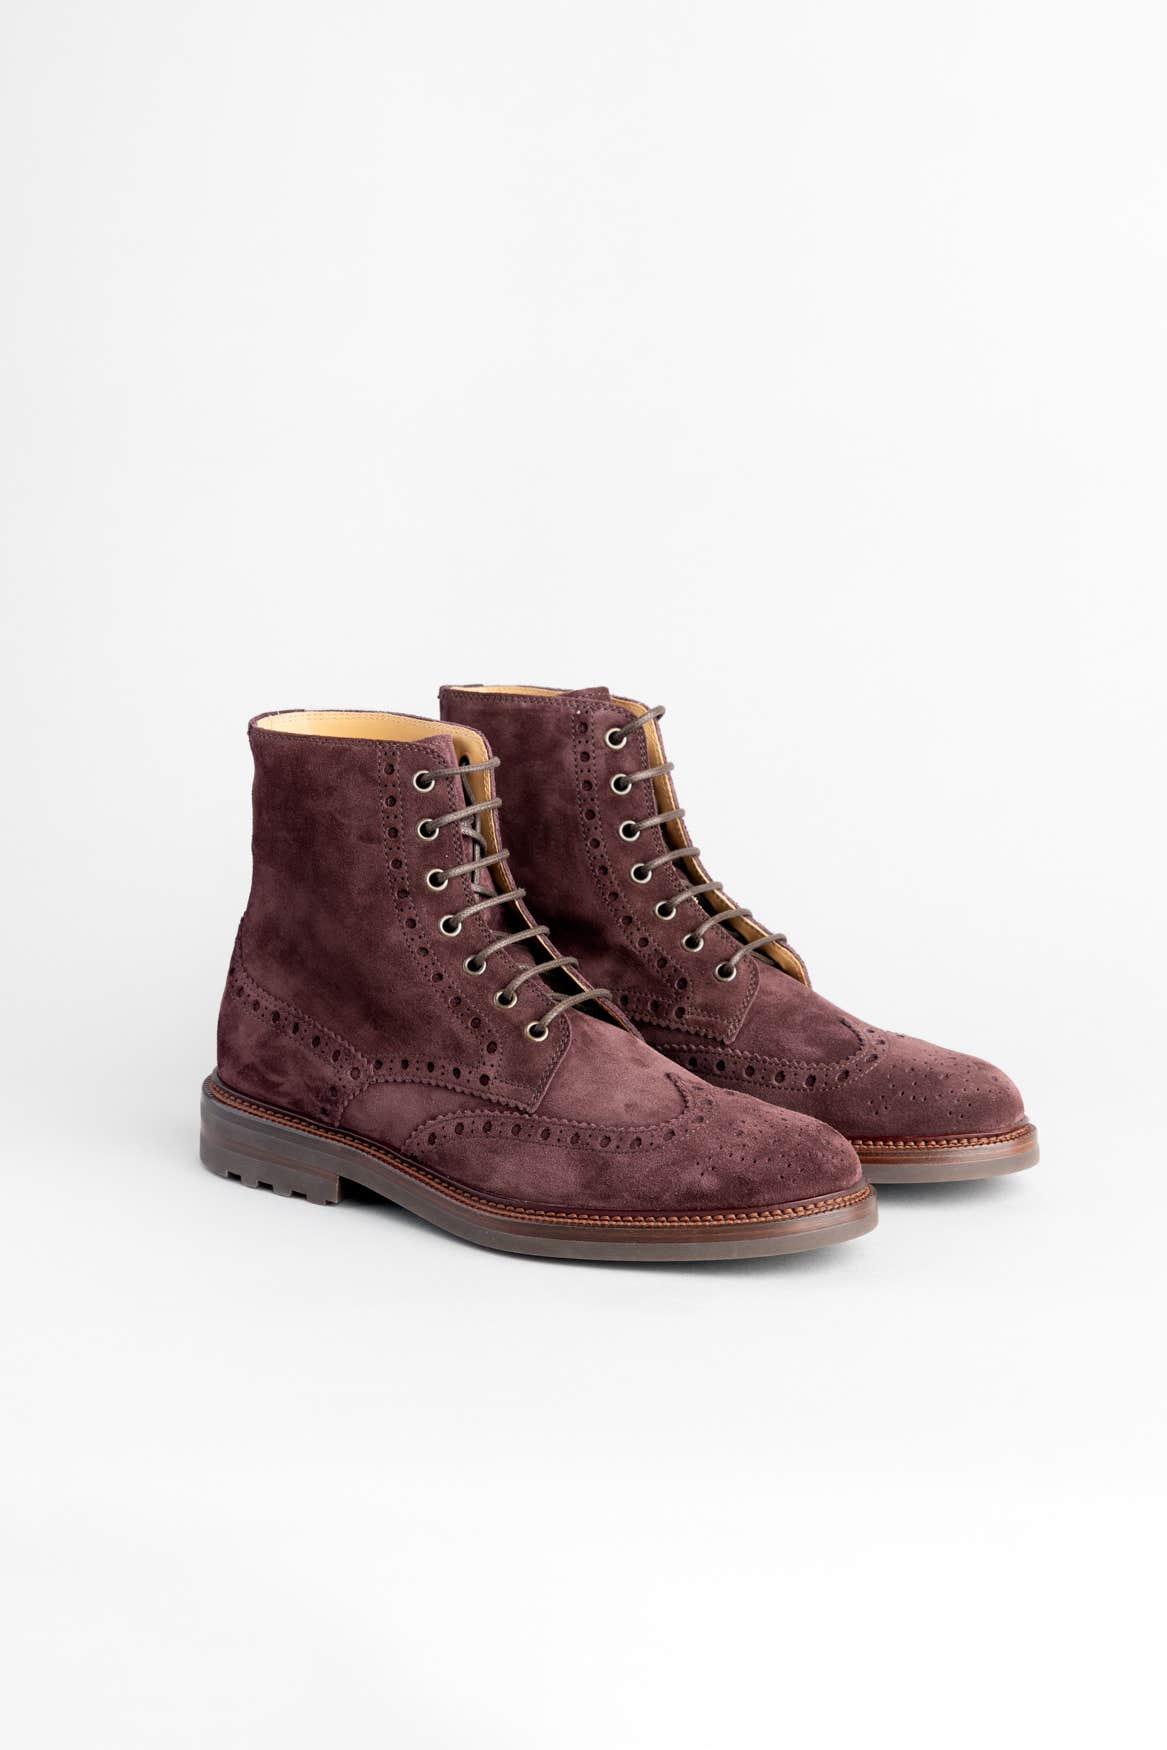 Merlot Red Suede Boots – The Helm Clothing